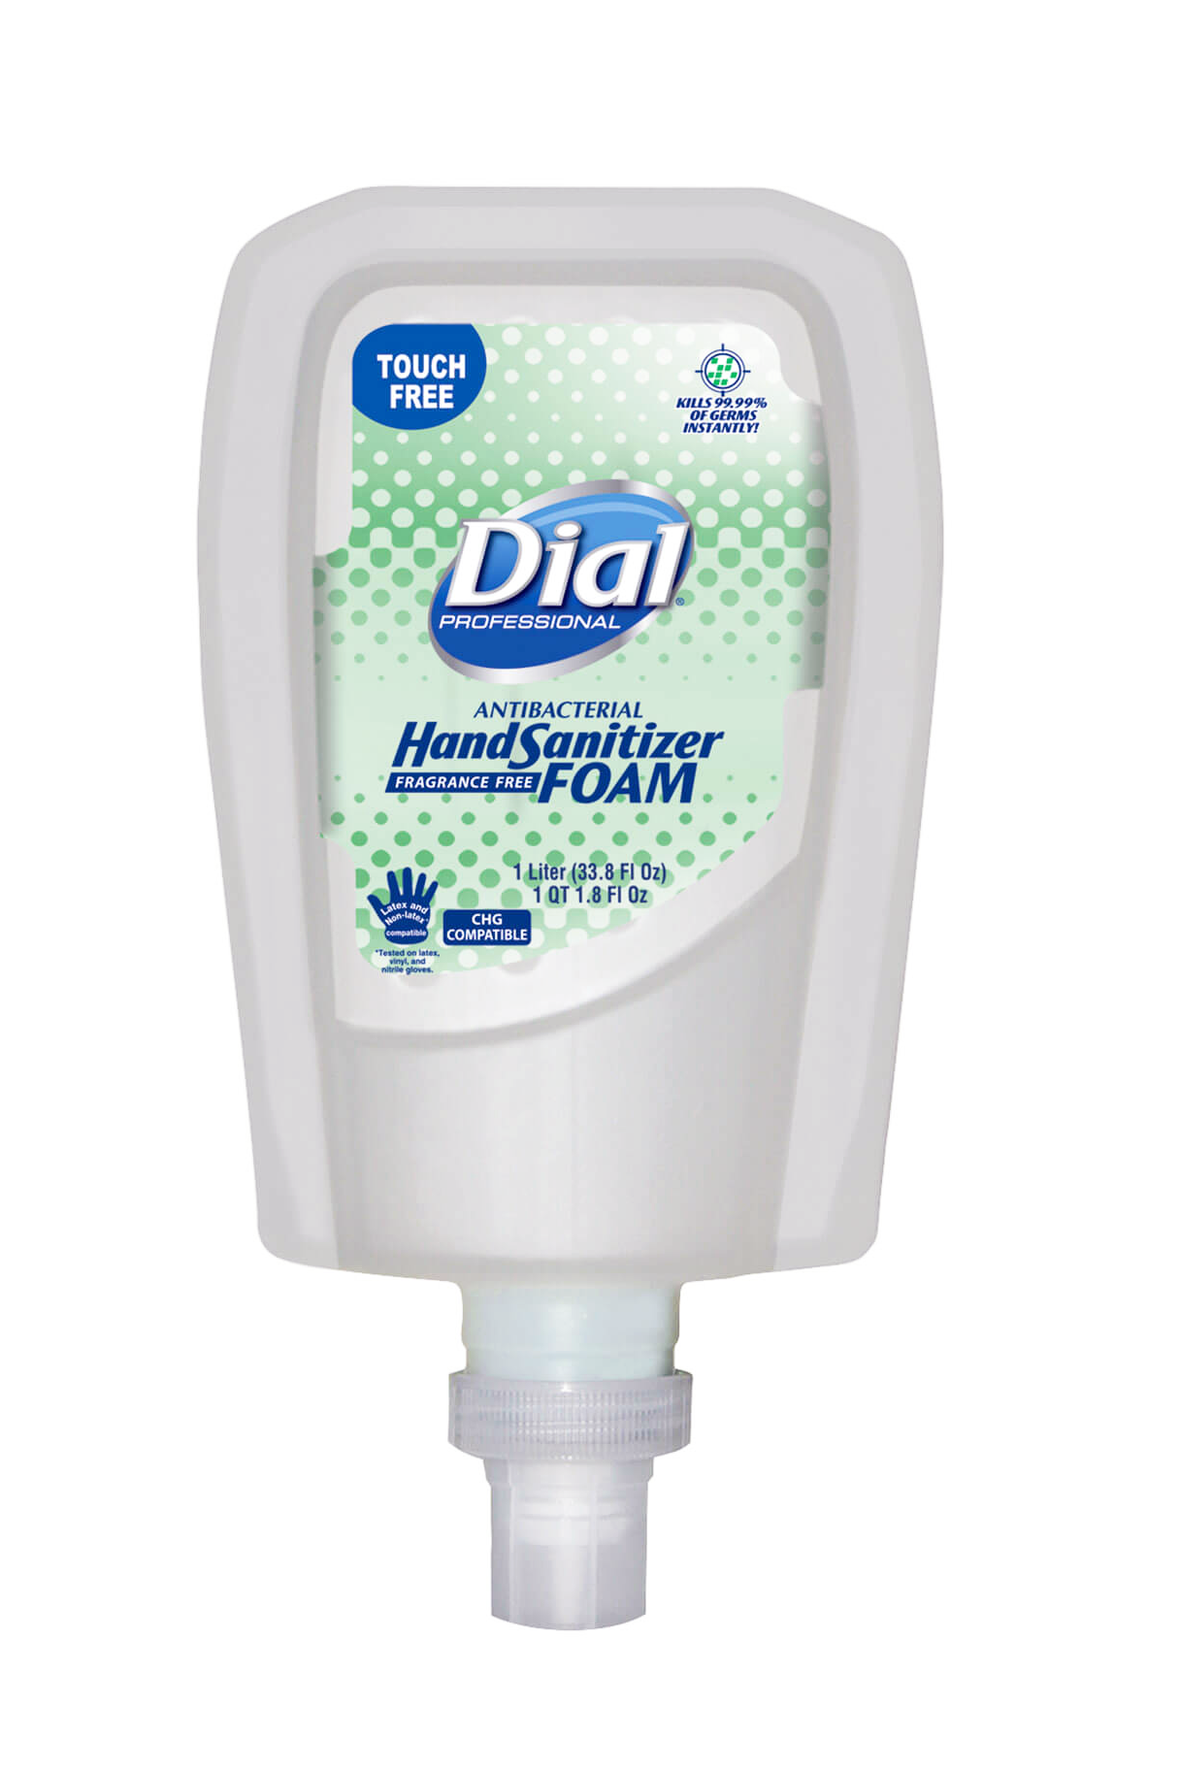 Dial Universal Touch Free Antibacterial Hand Sanitizer.